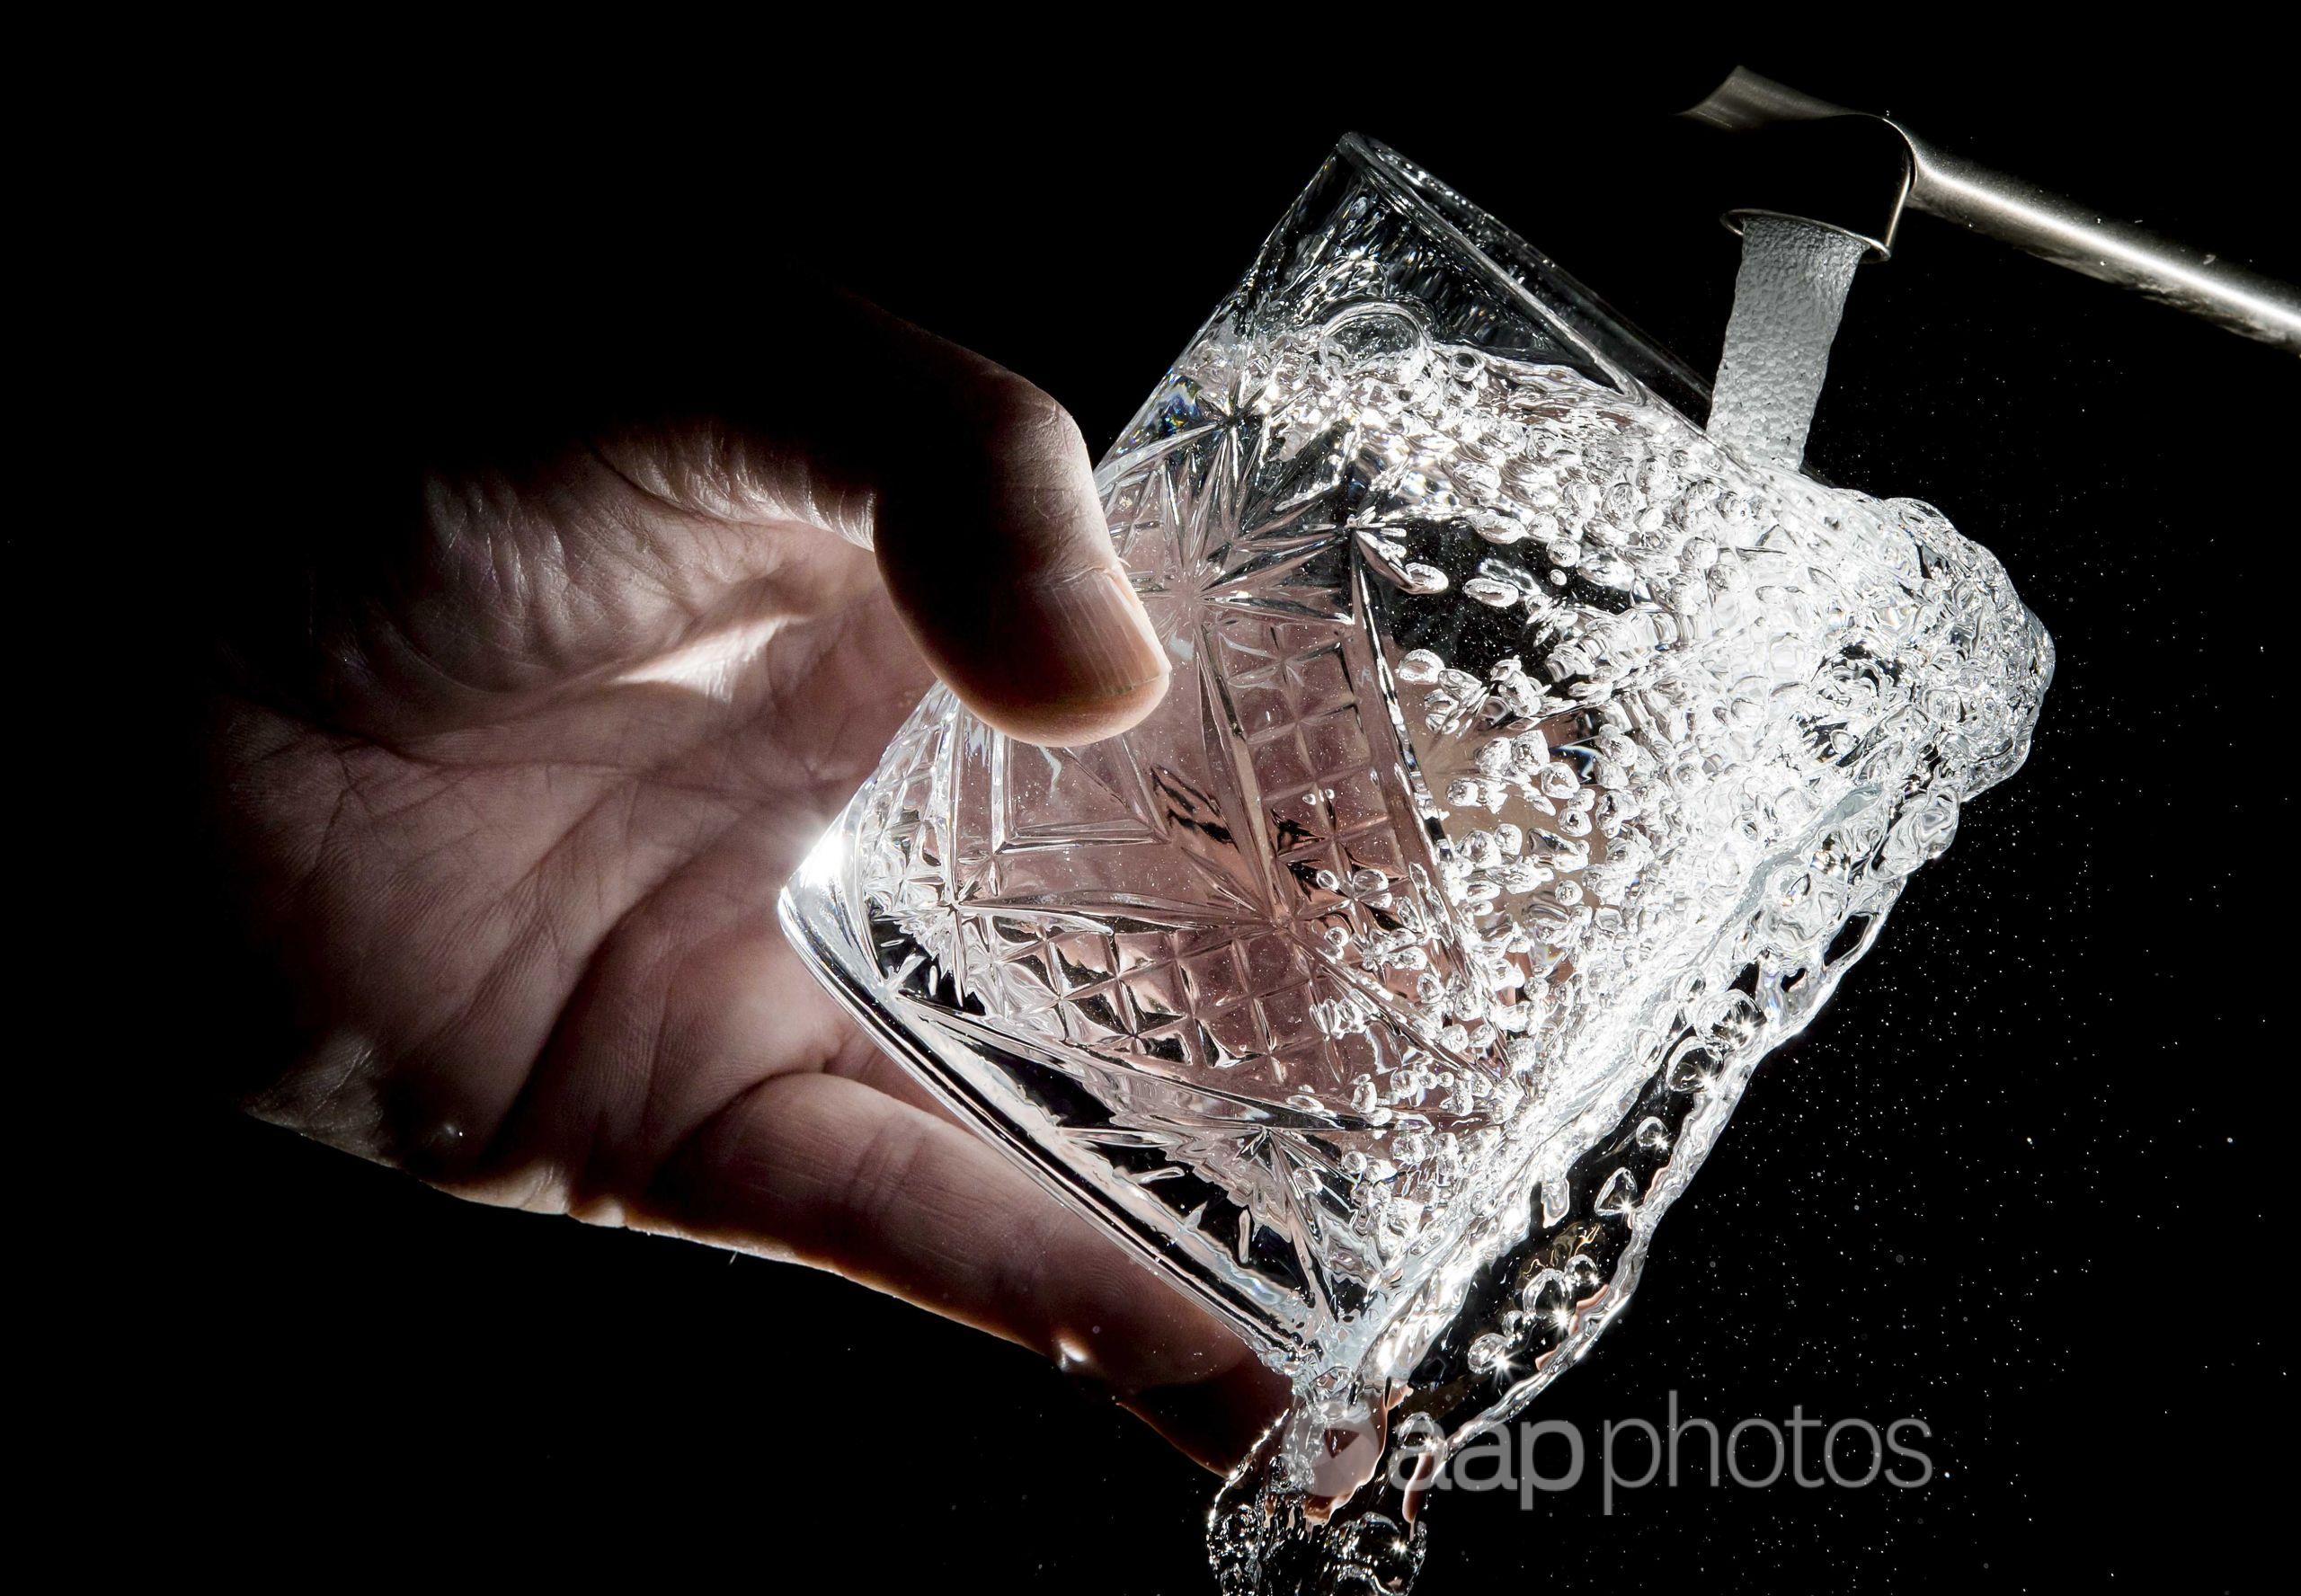 Water from a tap is poured into a glass.